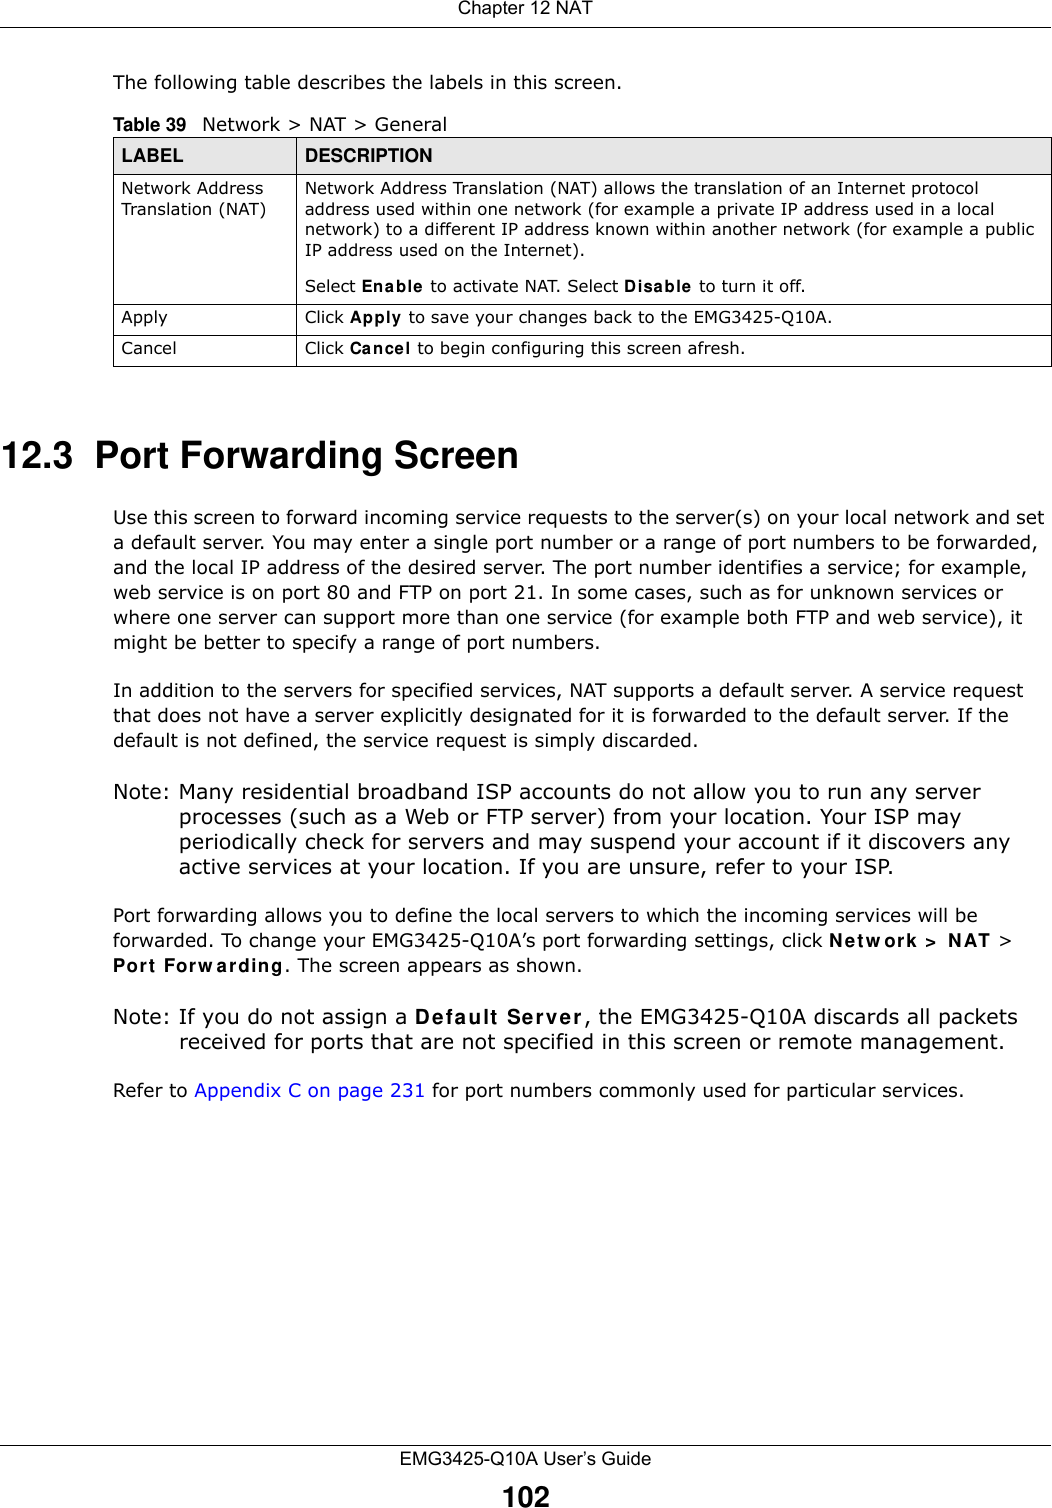 Chapter 12 NATEMG3425-Q10A User’s Guide102The following table describes the labels in this screen.12.3  Port Forwarding Screen   Use this screen to forward incoming service requests to the server(s) on your local network and set a default server. You may enter a single port number or a range of port numbers to be forwarded, and the local IP address of the desired server. The port number identifies a service; for example, web service is on port 80 and FTP on port 21. In some cases, such as for unknown services or where one server can support more than one service (for example both FTP and web service), it might be better to specify a range of port numbers.In addition to the servers for specified services, NAT supports a default server. A service request that does not have a server explicitly designated for it is forwarded to the default server. If the default is not defined, the service request is simply discarded.Note: Many residential broadband ISP accounts do not allow you to run any server processes (such as a Web or FTP server) from your location. Your ISP may periodically check for servers and may suspend your account if it discovers any active services at your location. If you are unsure, refer to your ISP.Port forwarding allows you to define the local servers to which the incoming services will be forwarded. To change your EMG3425-Q10A’s port forwarding settings, click Net w ork &gt;  N AT &gt; Port Forw arding. The screen appears as shown.Note: If you do not assign a Defa ult Serve r, the EMG3425-Q10A discards all packets received for ports that are not specified in this screen or remote management.Refer to Appendix C on page 231 for port numbers commonly used for particular services.Table 39   Network &gt; NAT &gt; GeneralLABEL DESCRIPTIONNetwork Address Transla tion (NAT)Network Address Translation (NAT) allows the translation of an Internet protocol address used within one network (for example a private IP address used in a local network) to a different IP address known within another network (for example a public IP address used on the Internet). Select En able to activate NAT. Select Disable  to turn it off.Apply Click Apply to save your changes back to the EMG3425-Q10A.Cancel Click Cancel to begin configuring this screen afresh.